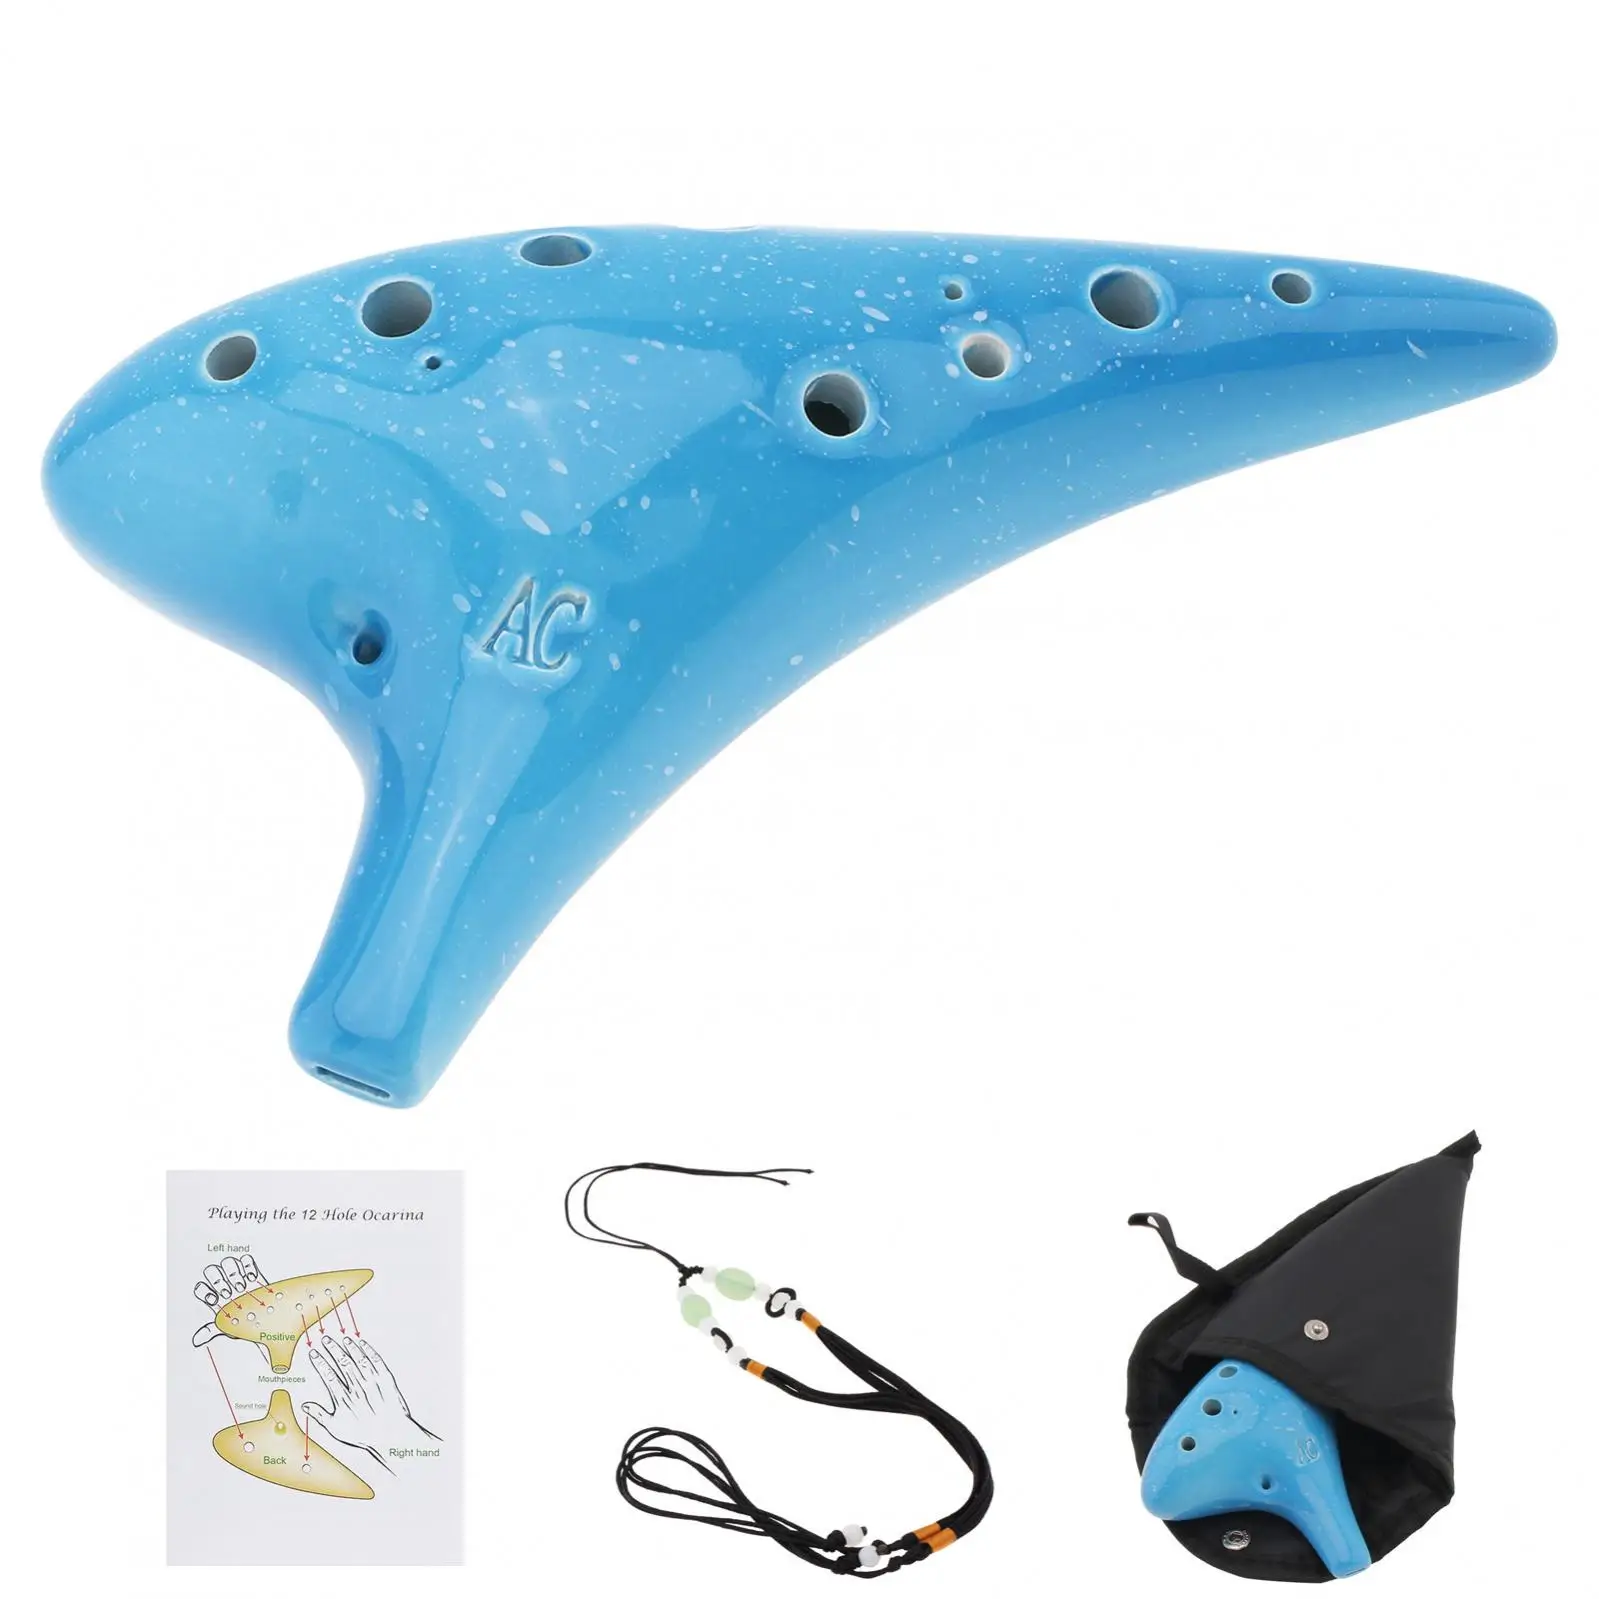 

12 Holes Alto ToneC Sky Blue Ceramic Ocarina for Children / Adults / Beginners with Song Book Neck Cord Carry Bag